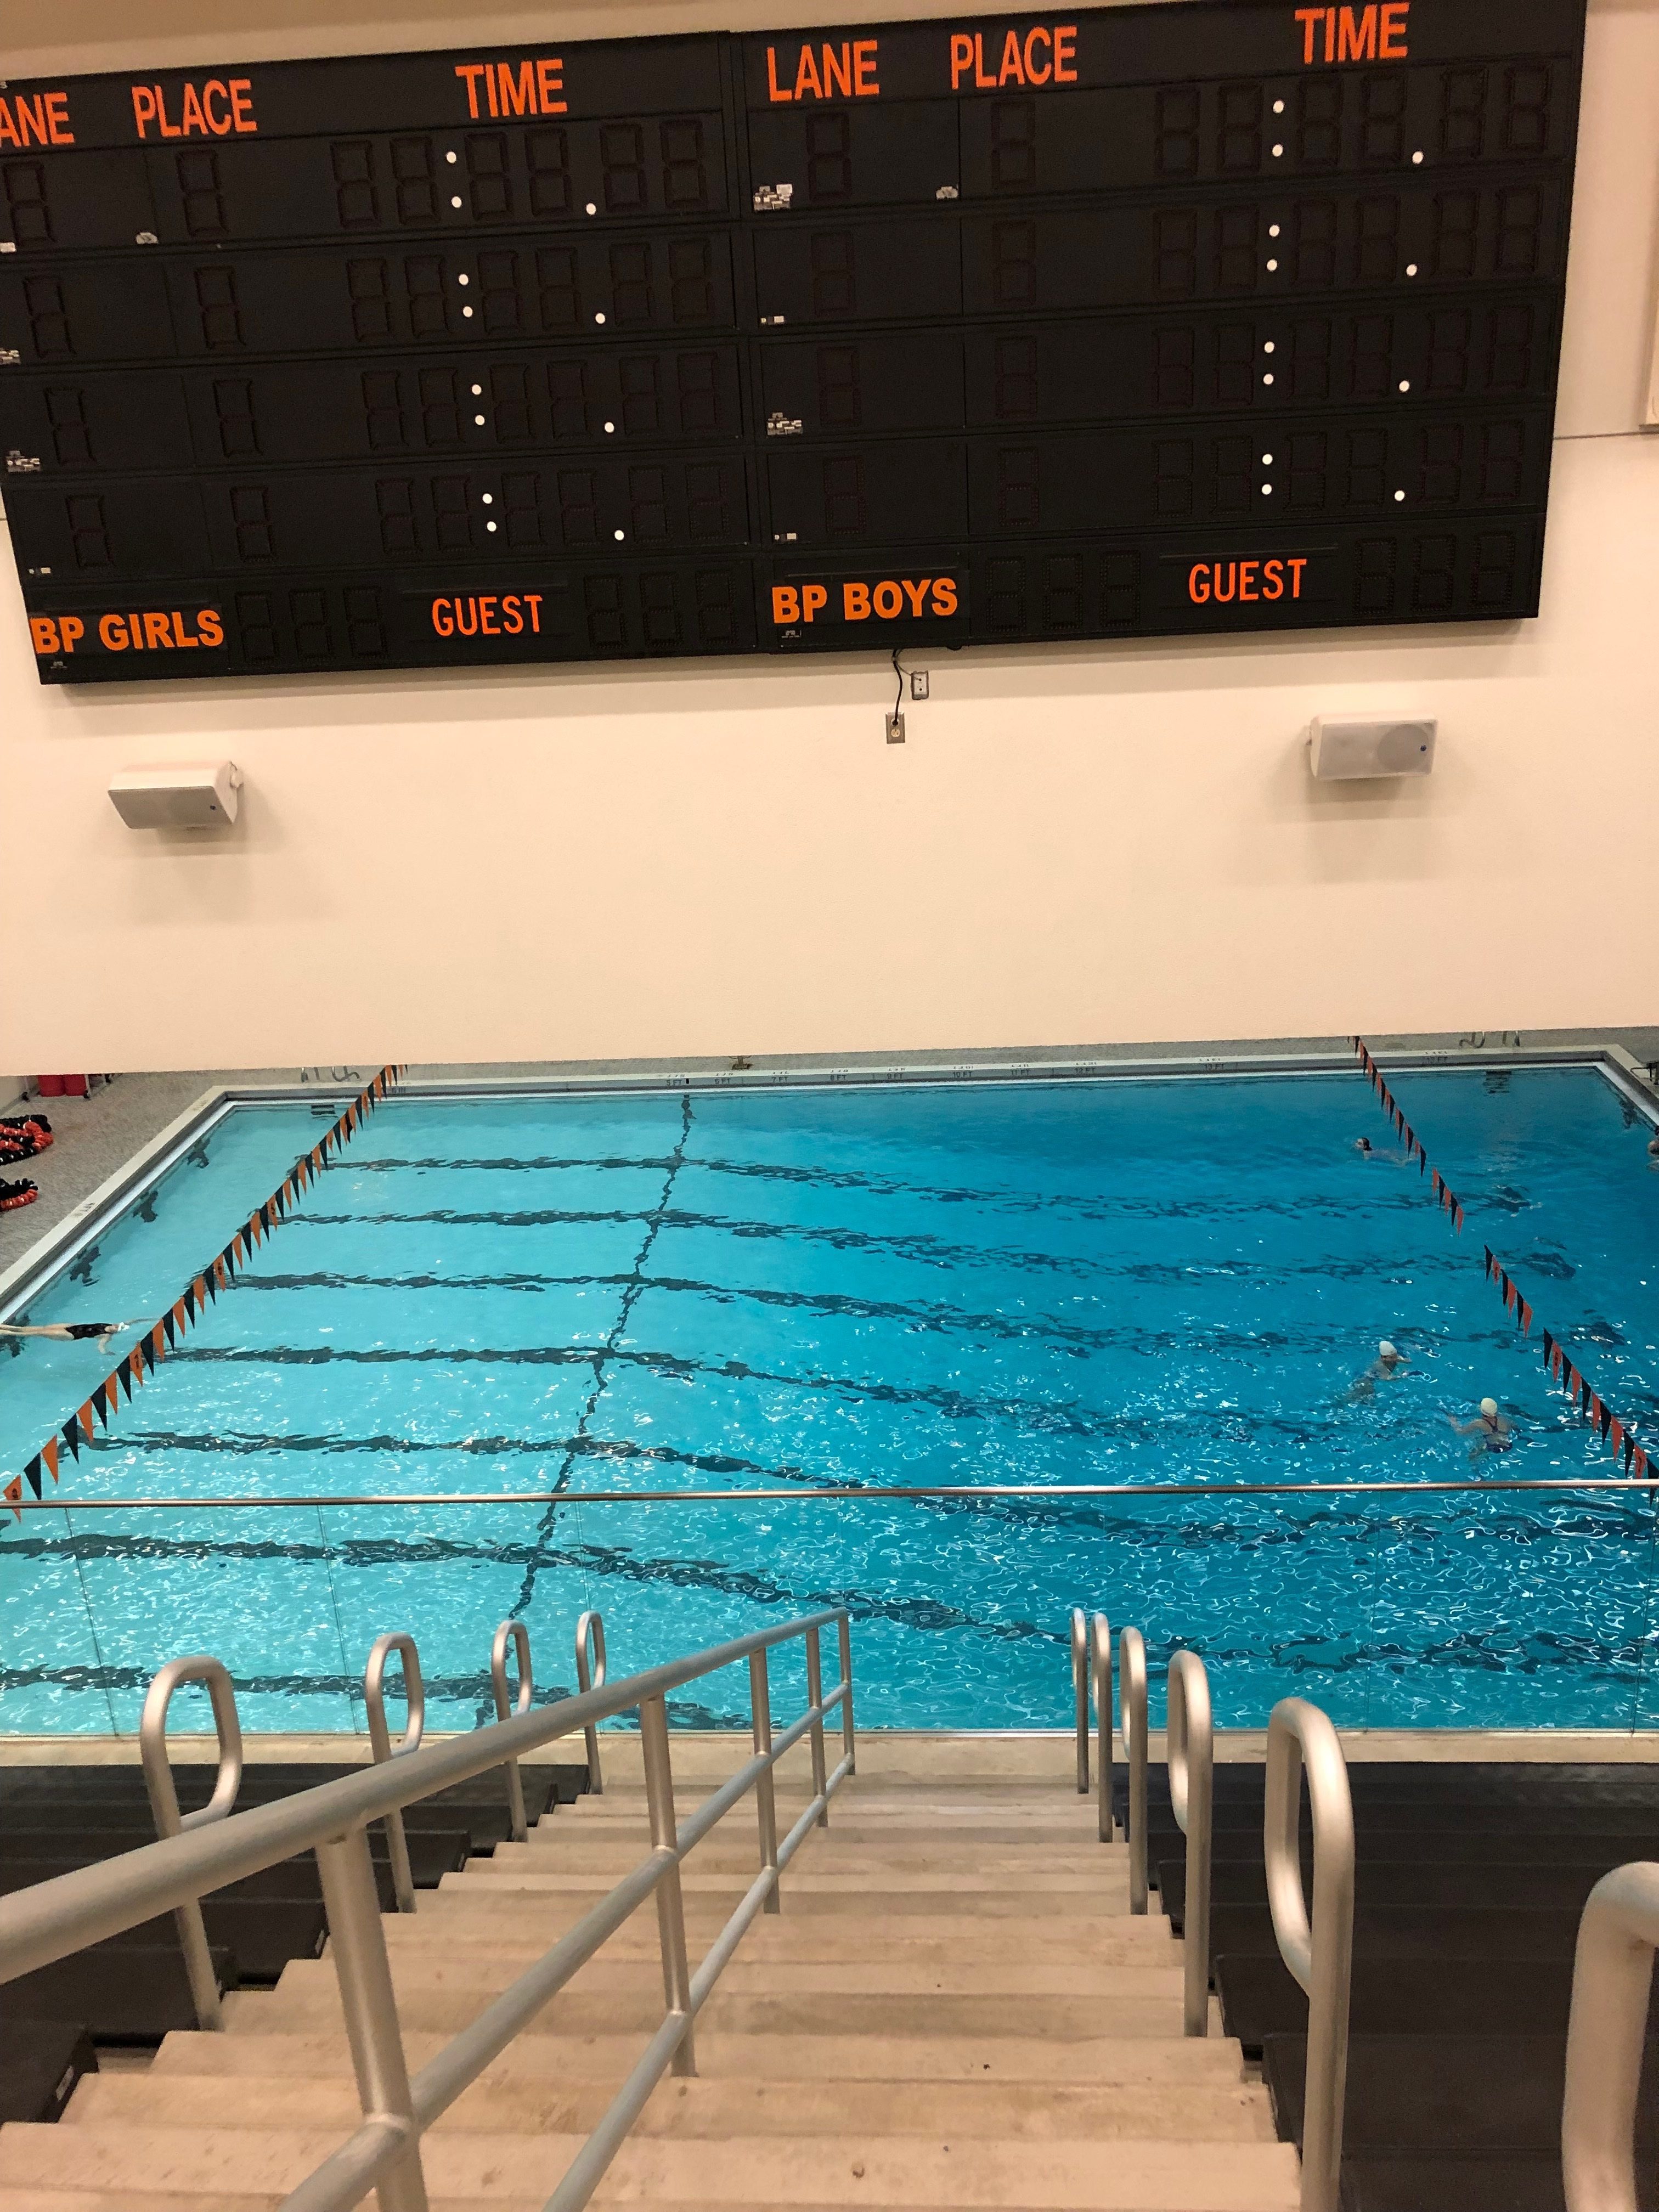 Extra scoreboard for fans to view the results from the balcony at the pool at Bethel Park High School.